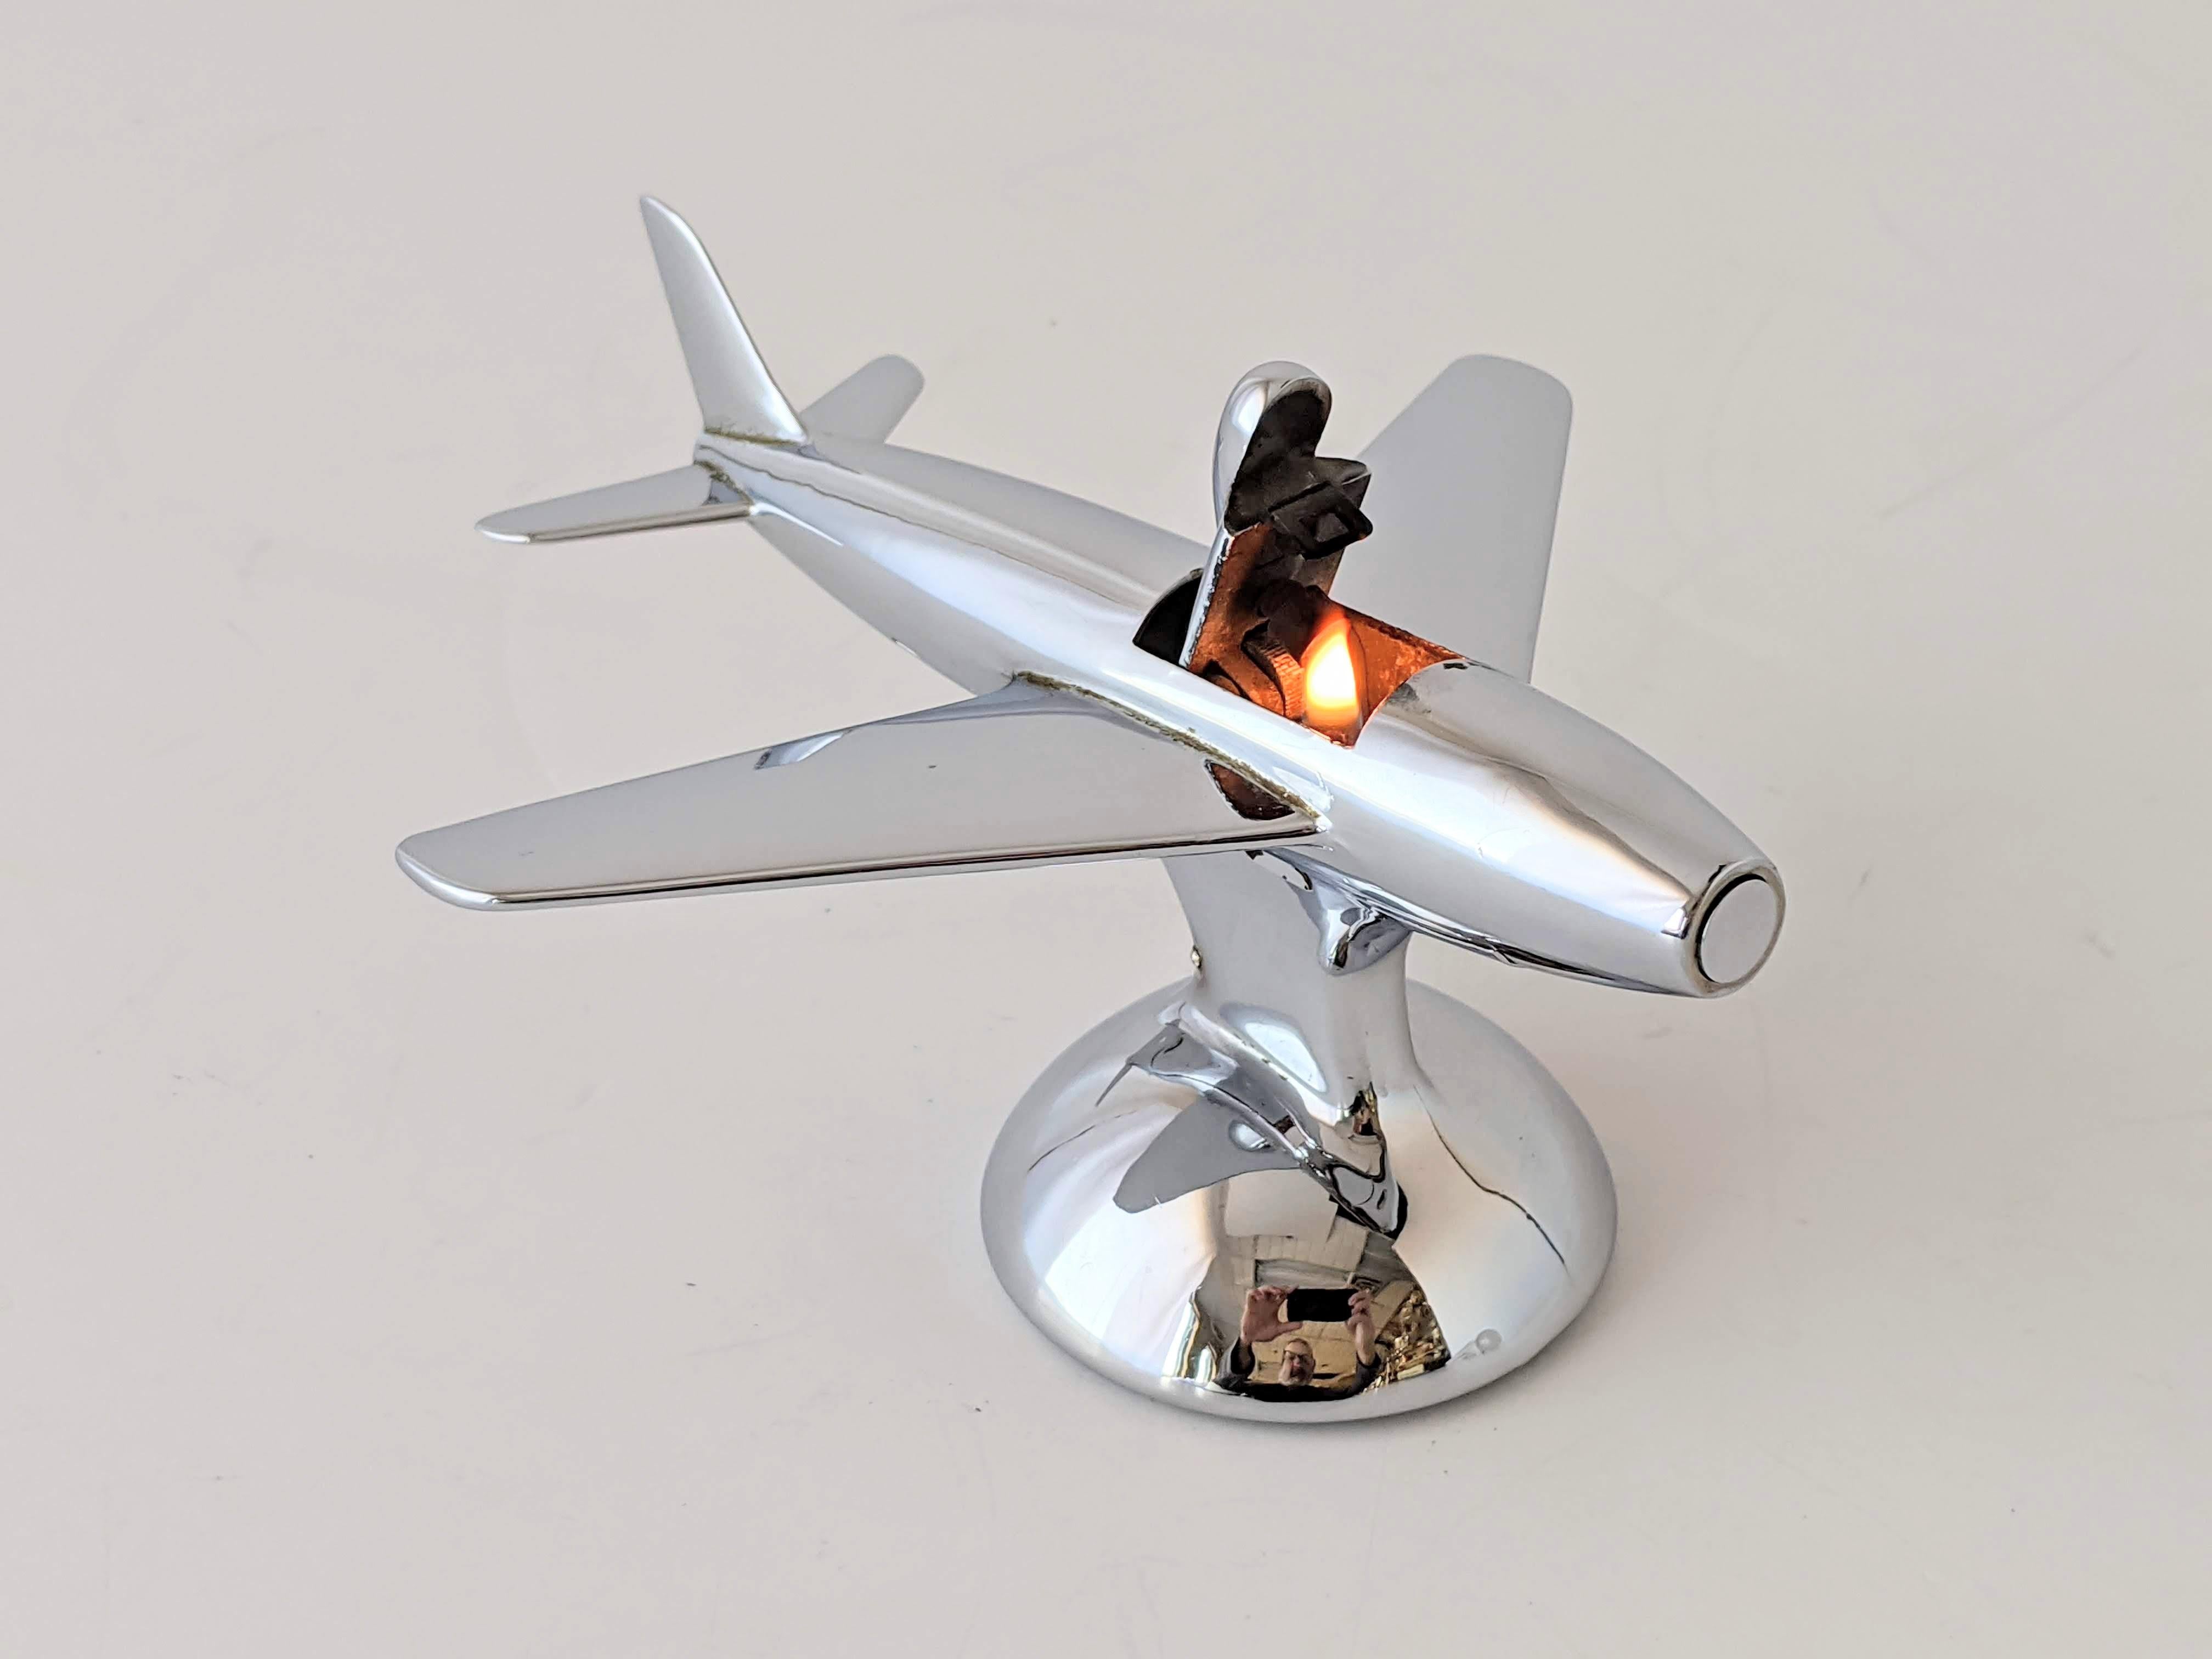 Dunhill Sabre Jet Fighter lighter, 1954.

The Dunhill 'Jet Plane' Lighter is depicting the famous North American Aviation F-86 Sabre a transonic jet fighter aircraft. The Sabrejet set its first official world speed record of 570 mph (920 km/h) in